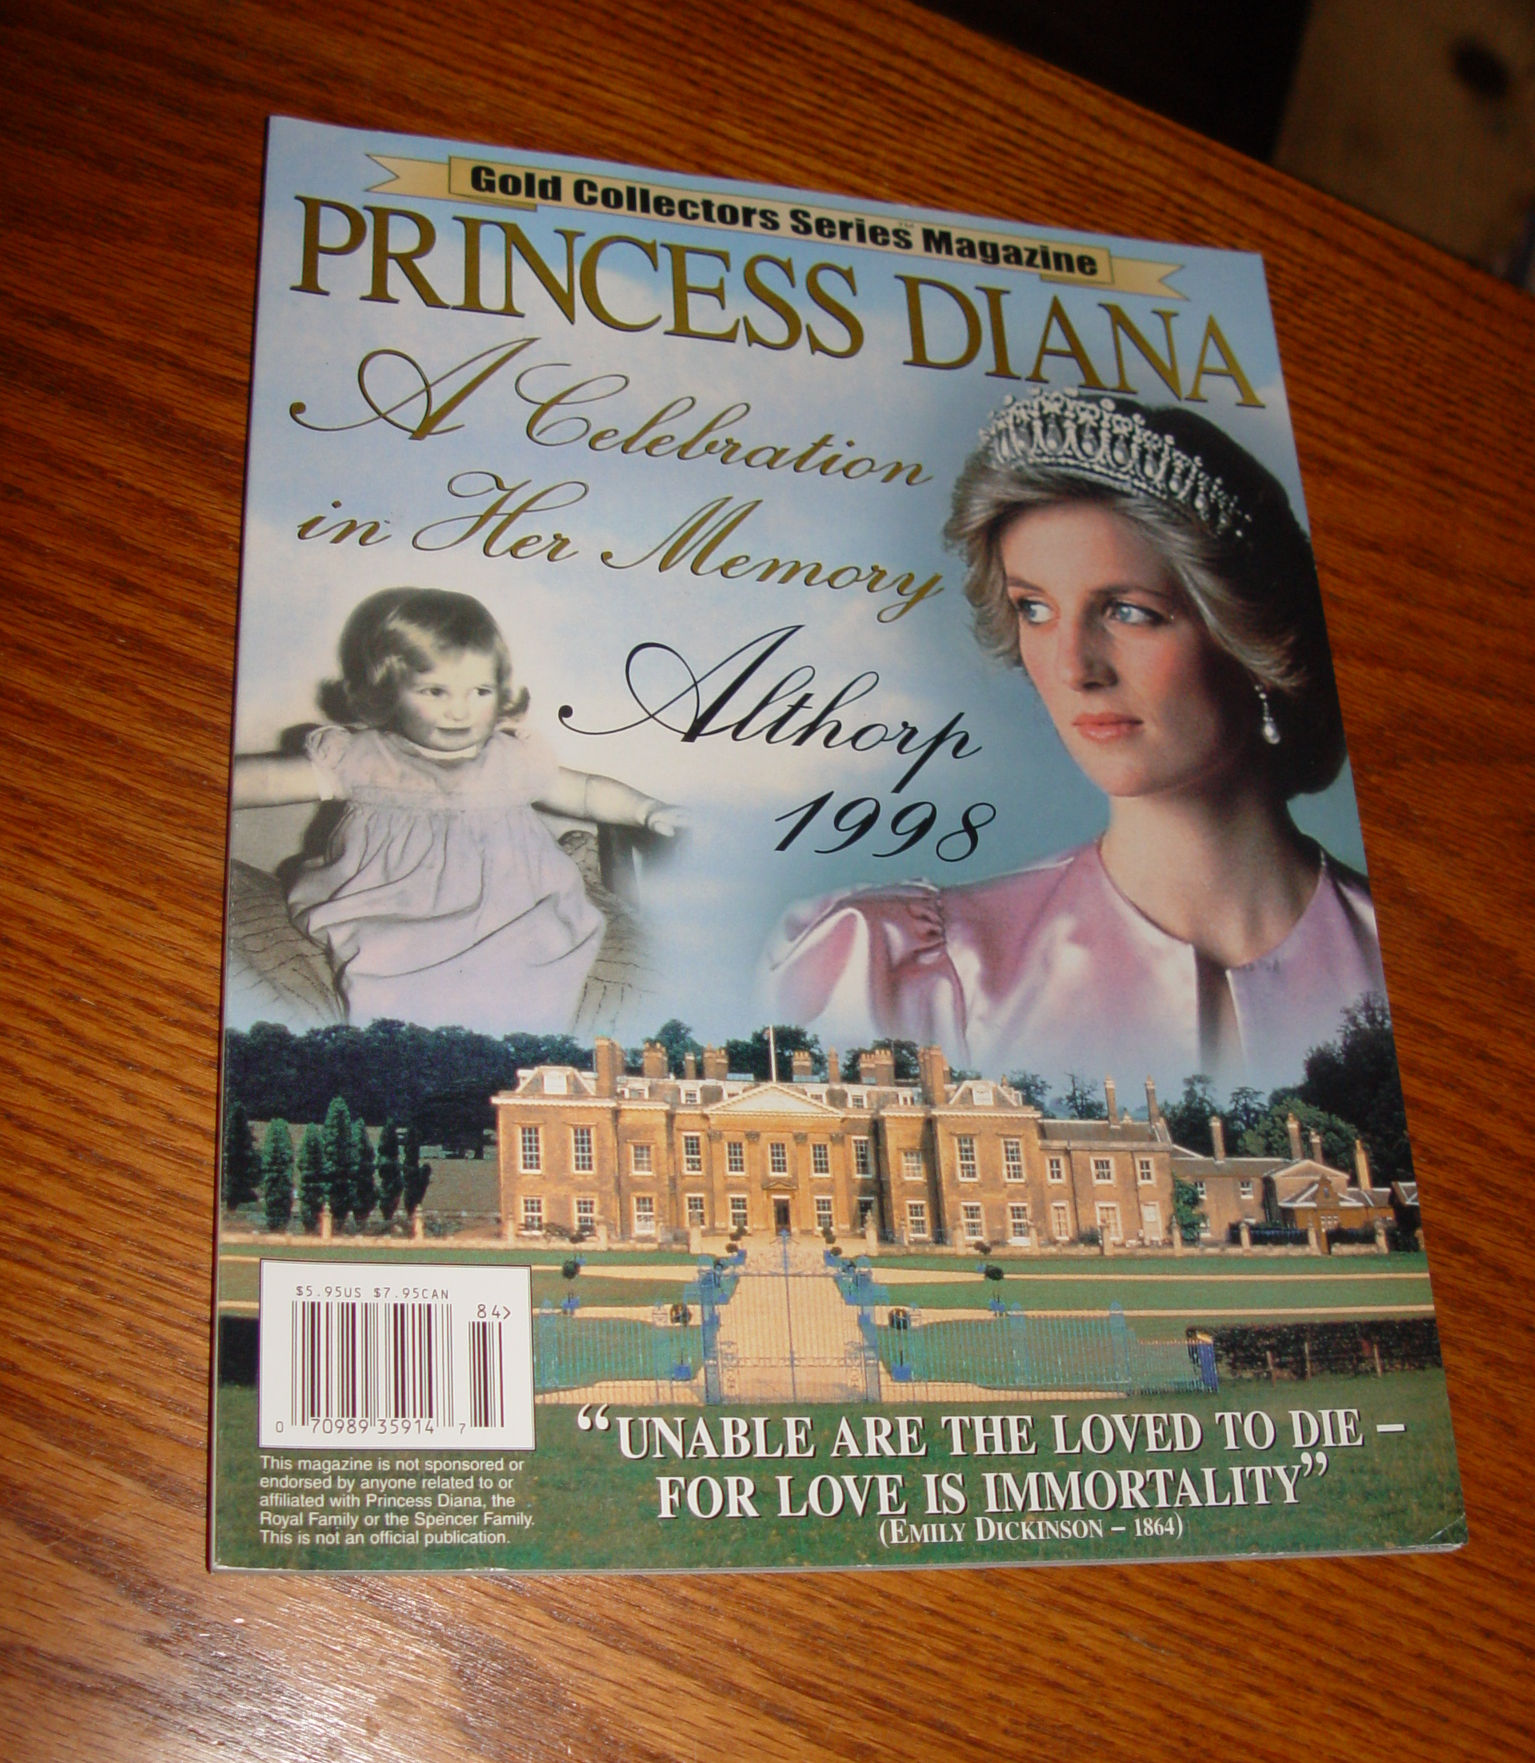 Princess Diana: A Celebration in Her Memory
                        Althorp 1998 - Gold Collectors Series